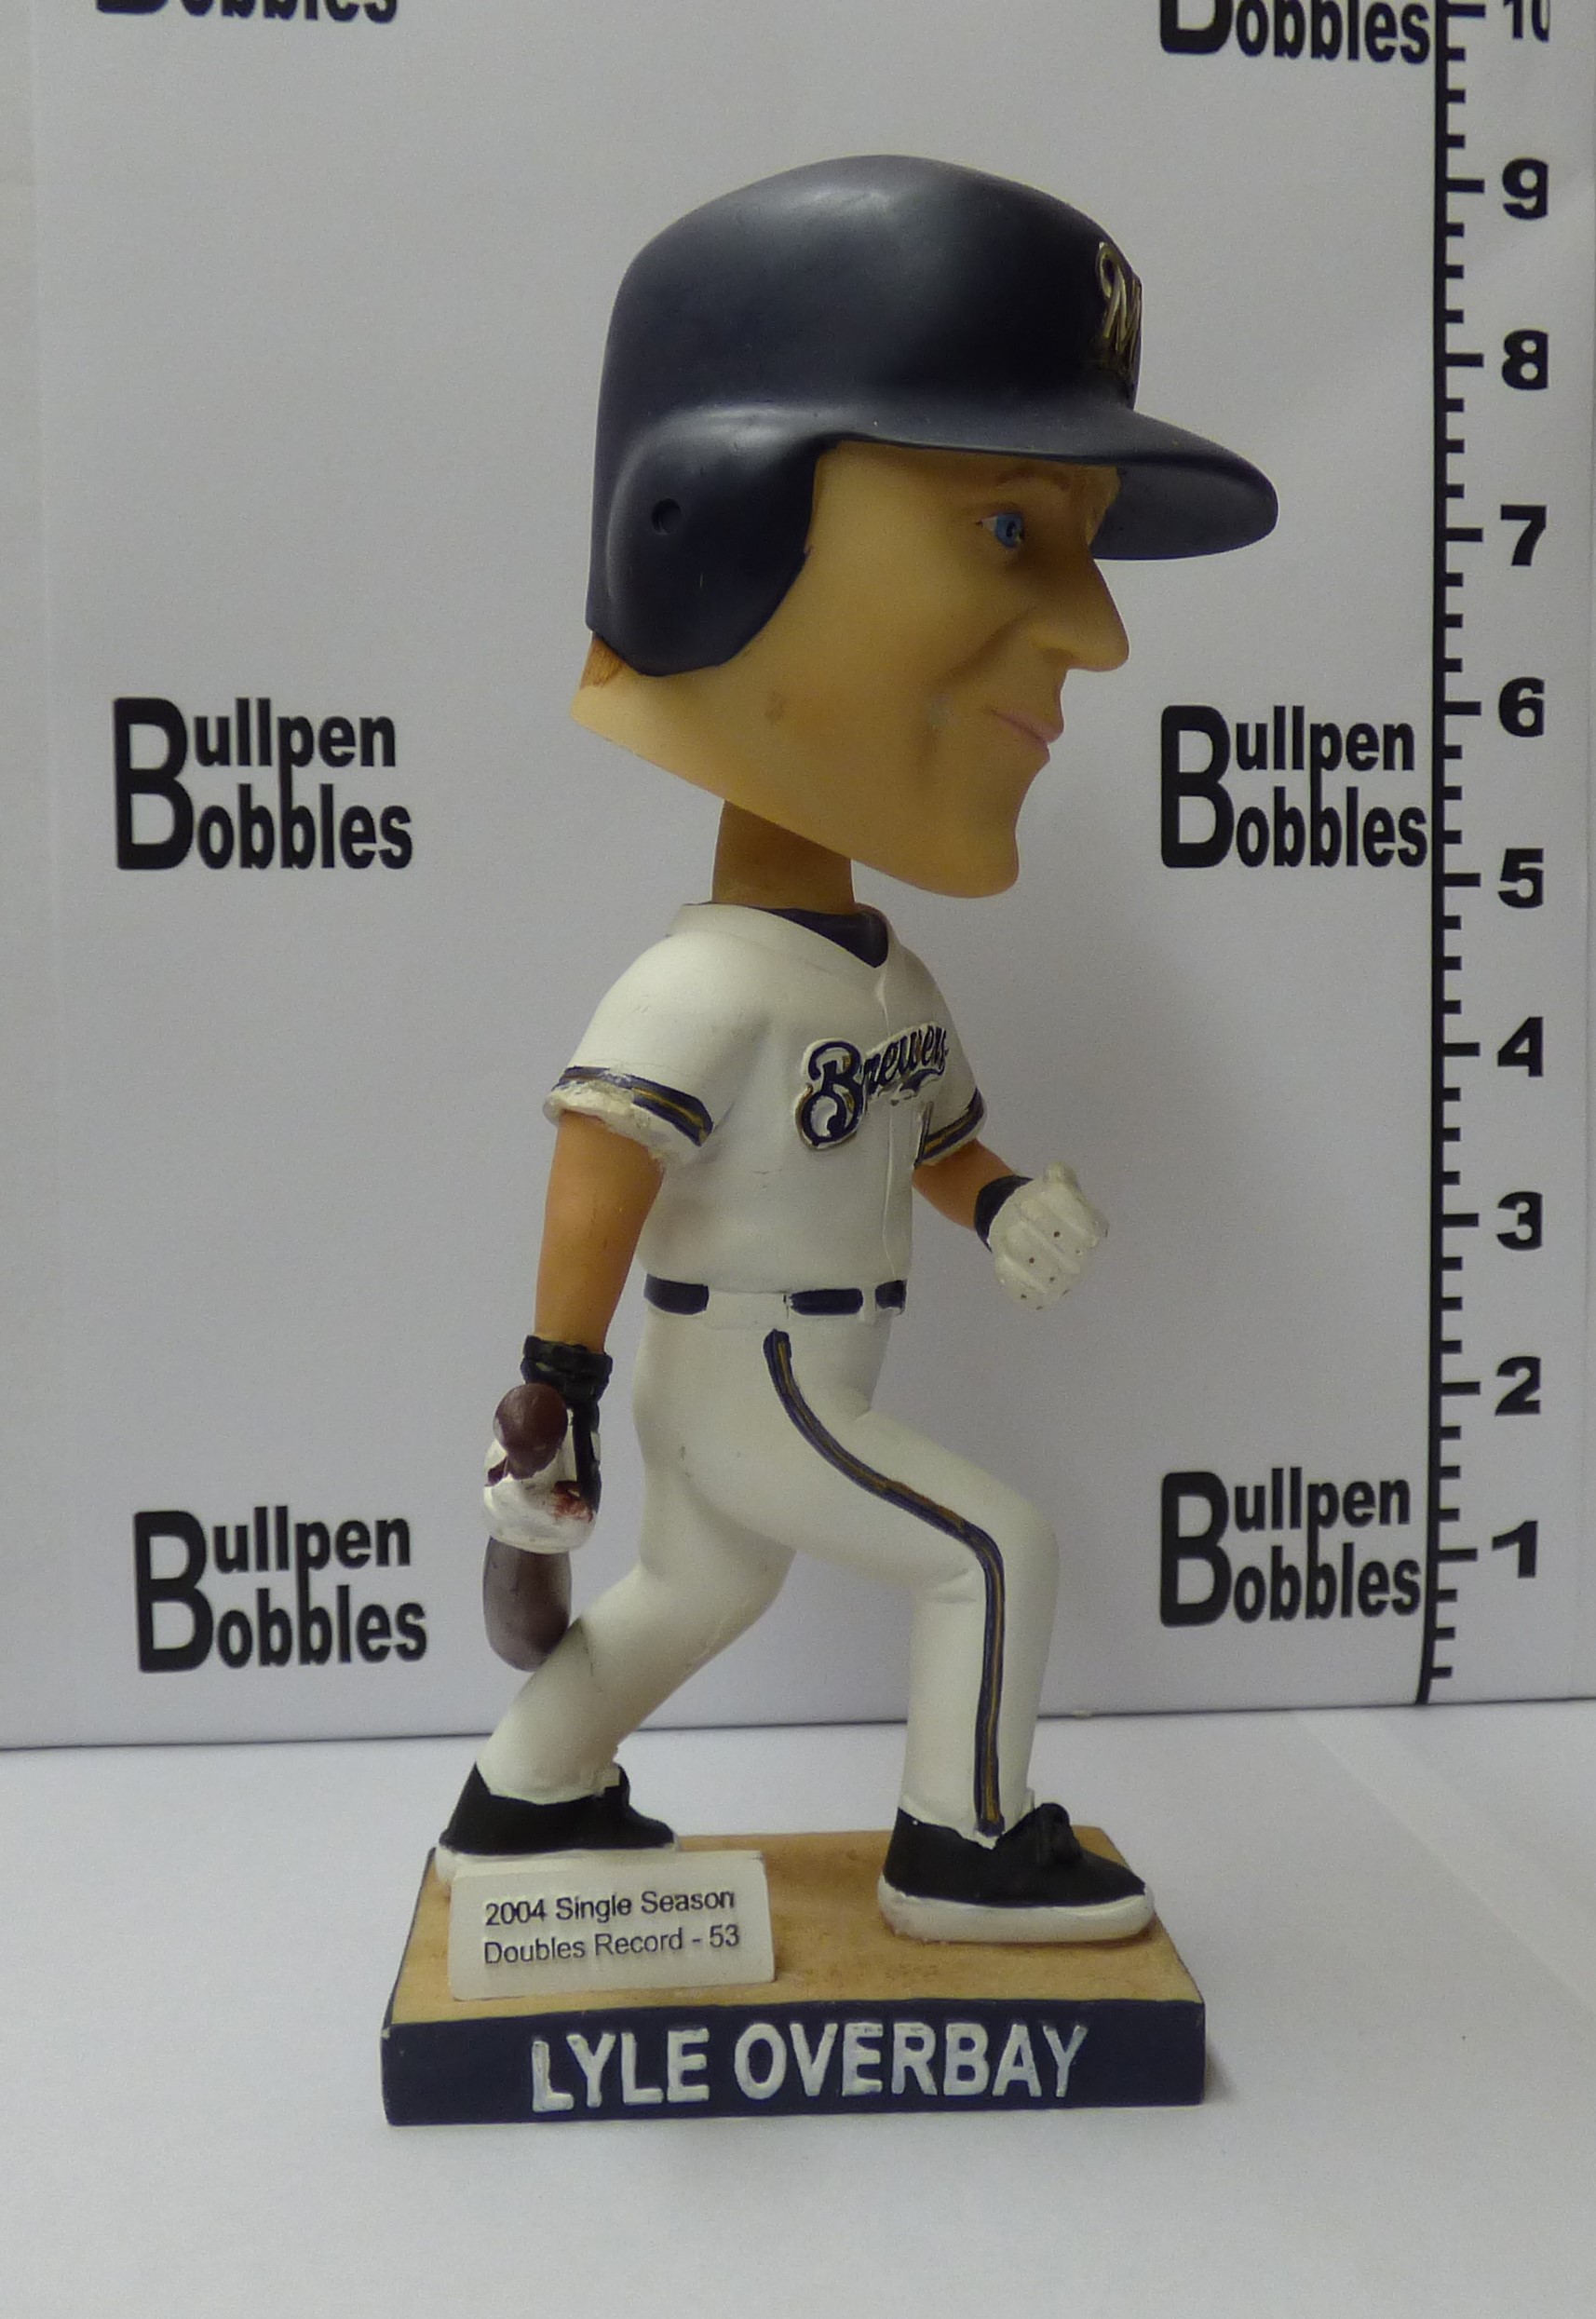 Lyle Overbay bobblehead